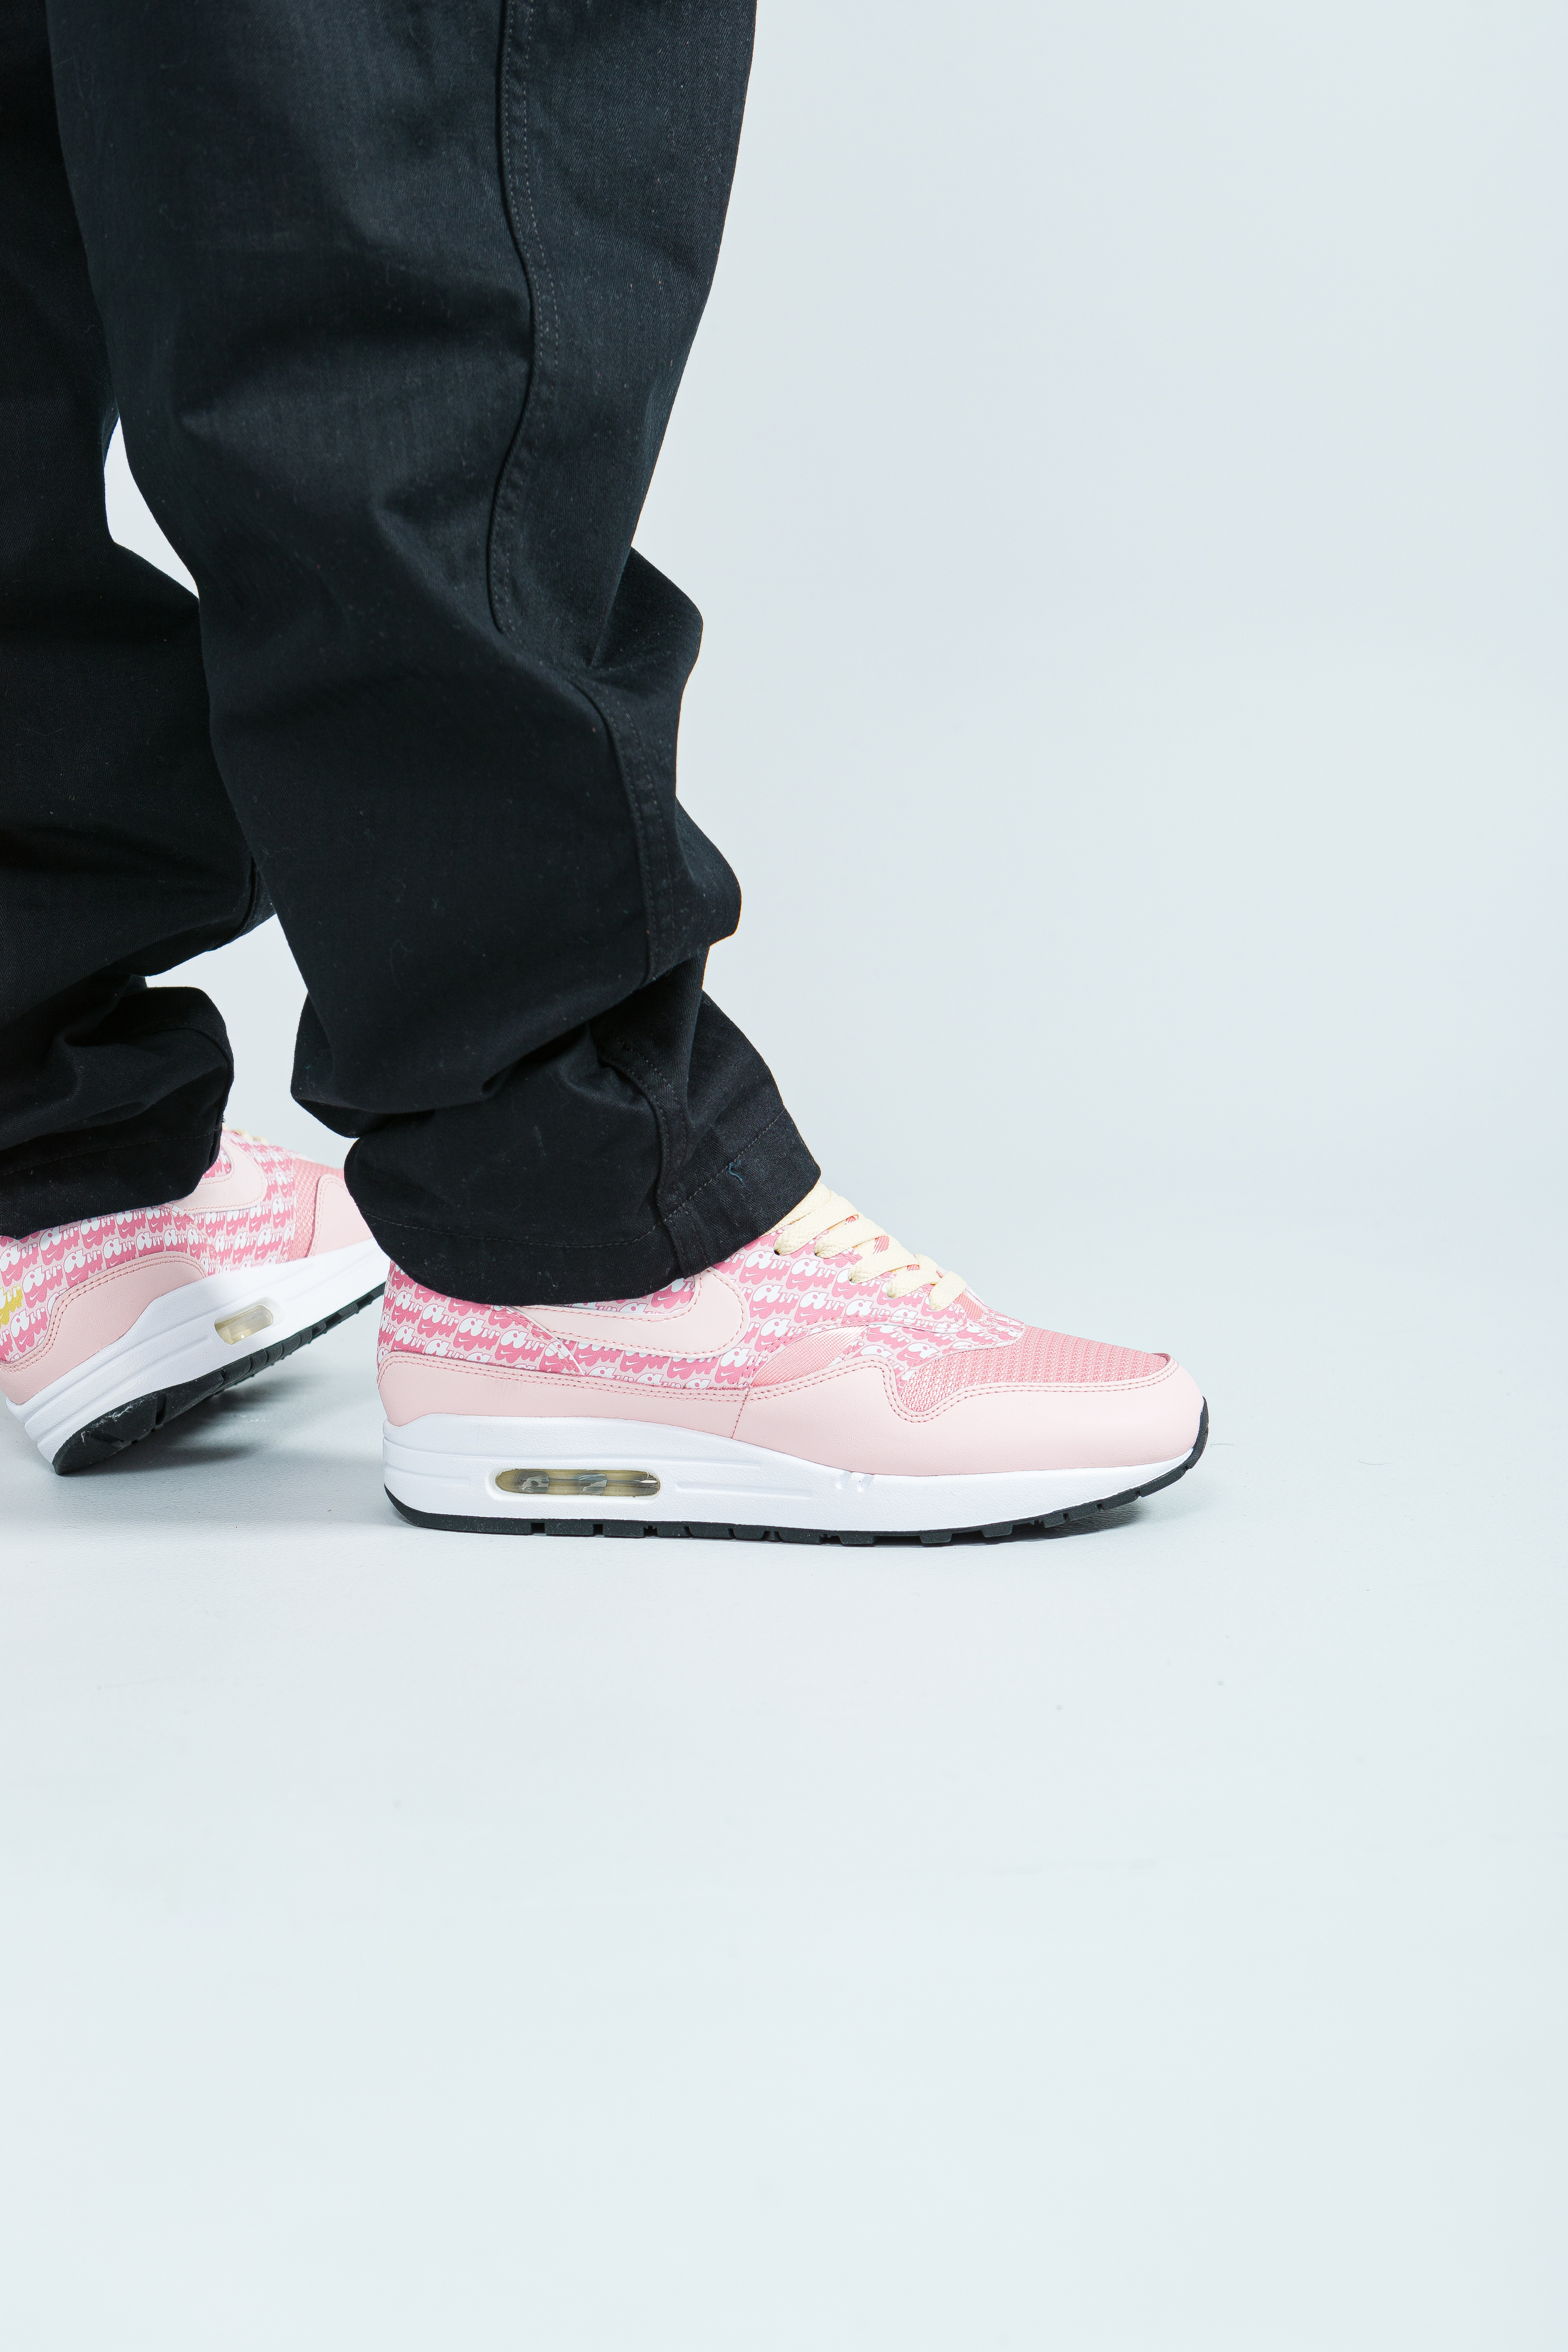 Up There Launches - Nike Air Max 1 'Pink Lemonade'